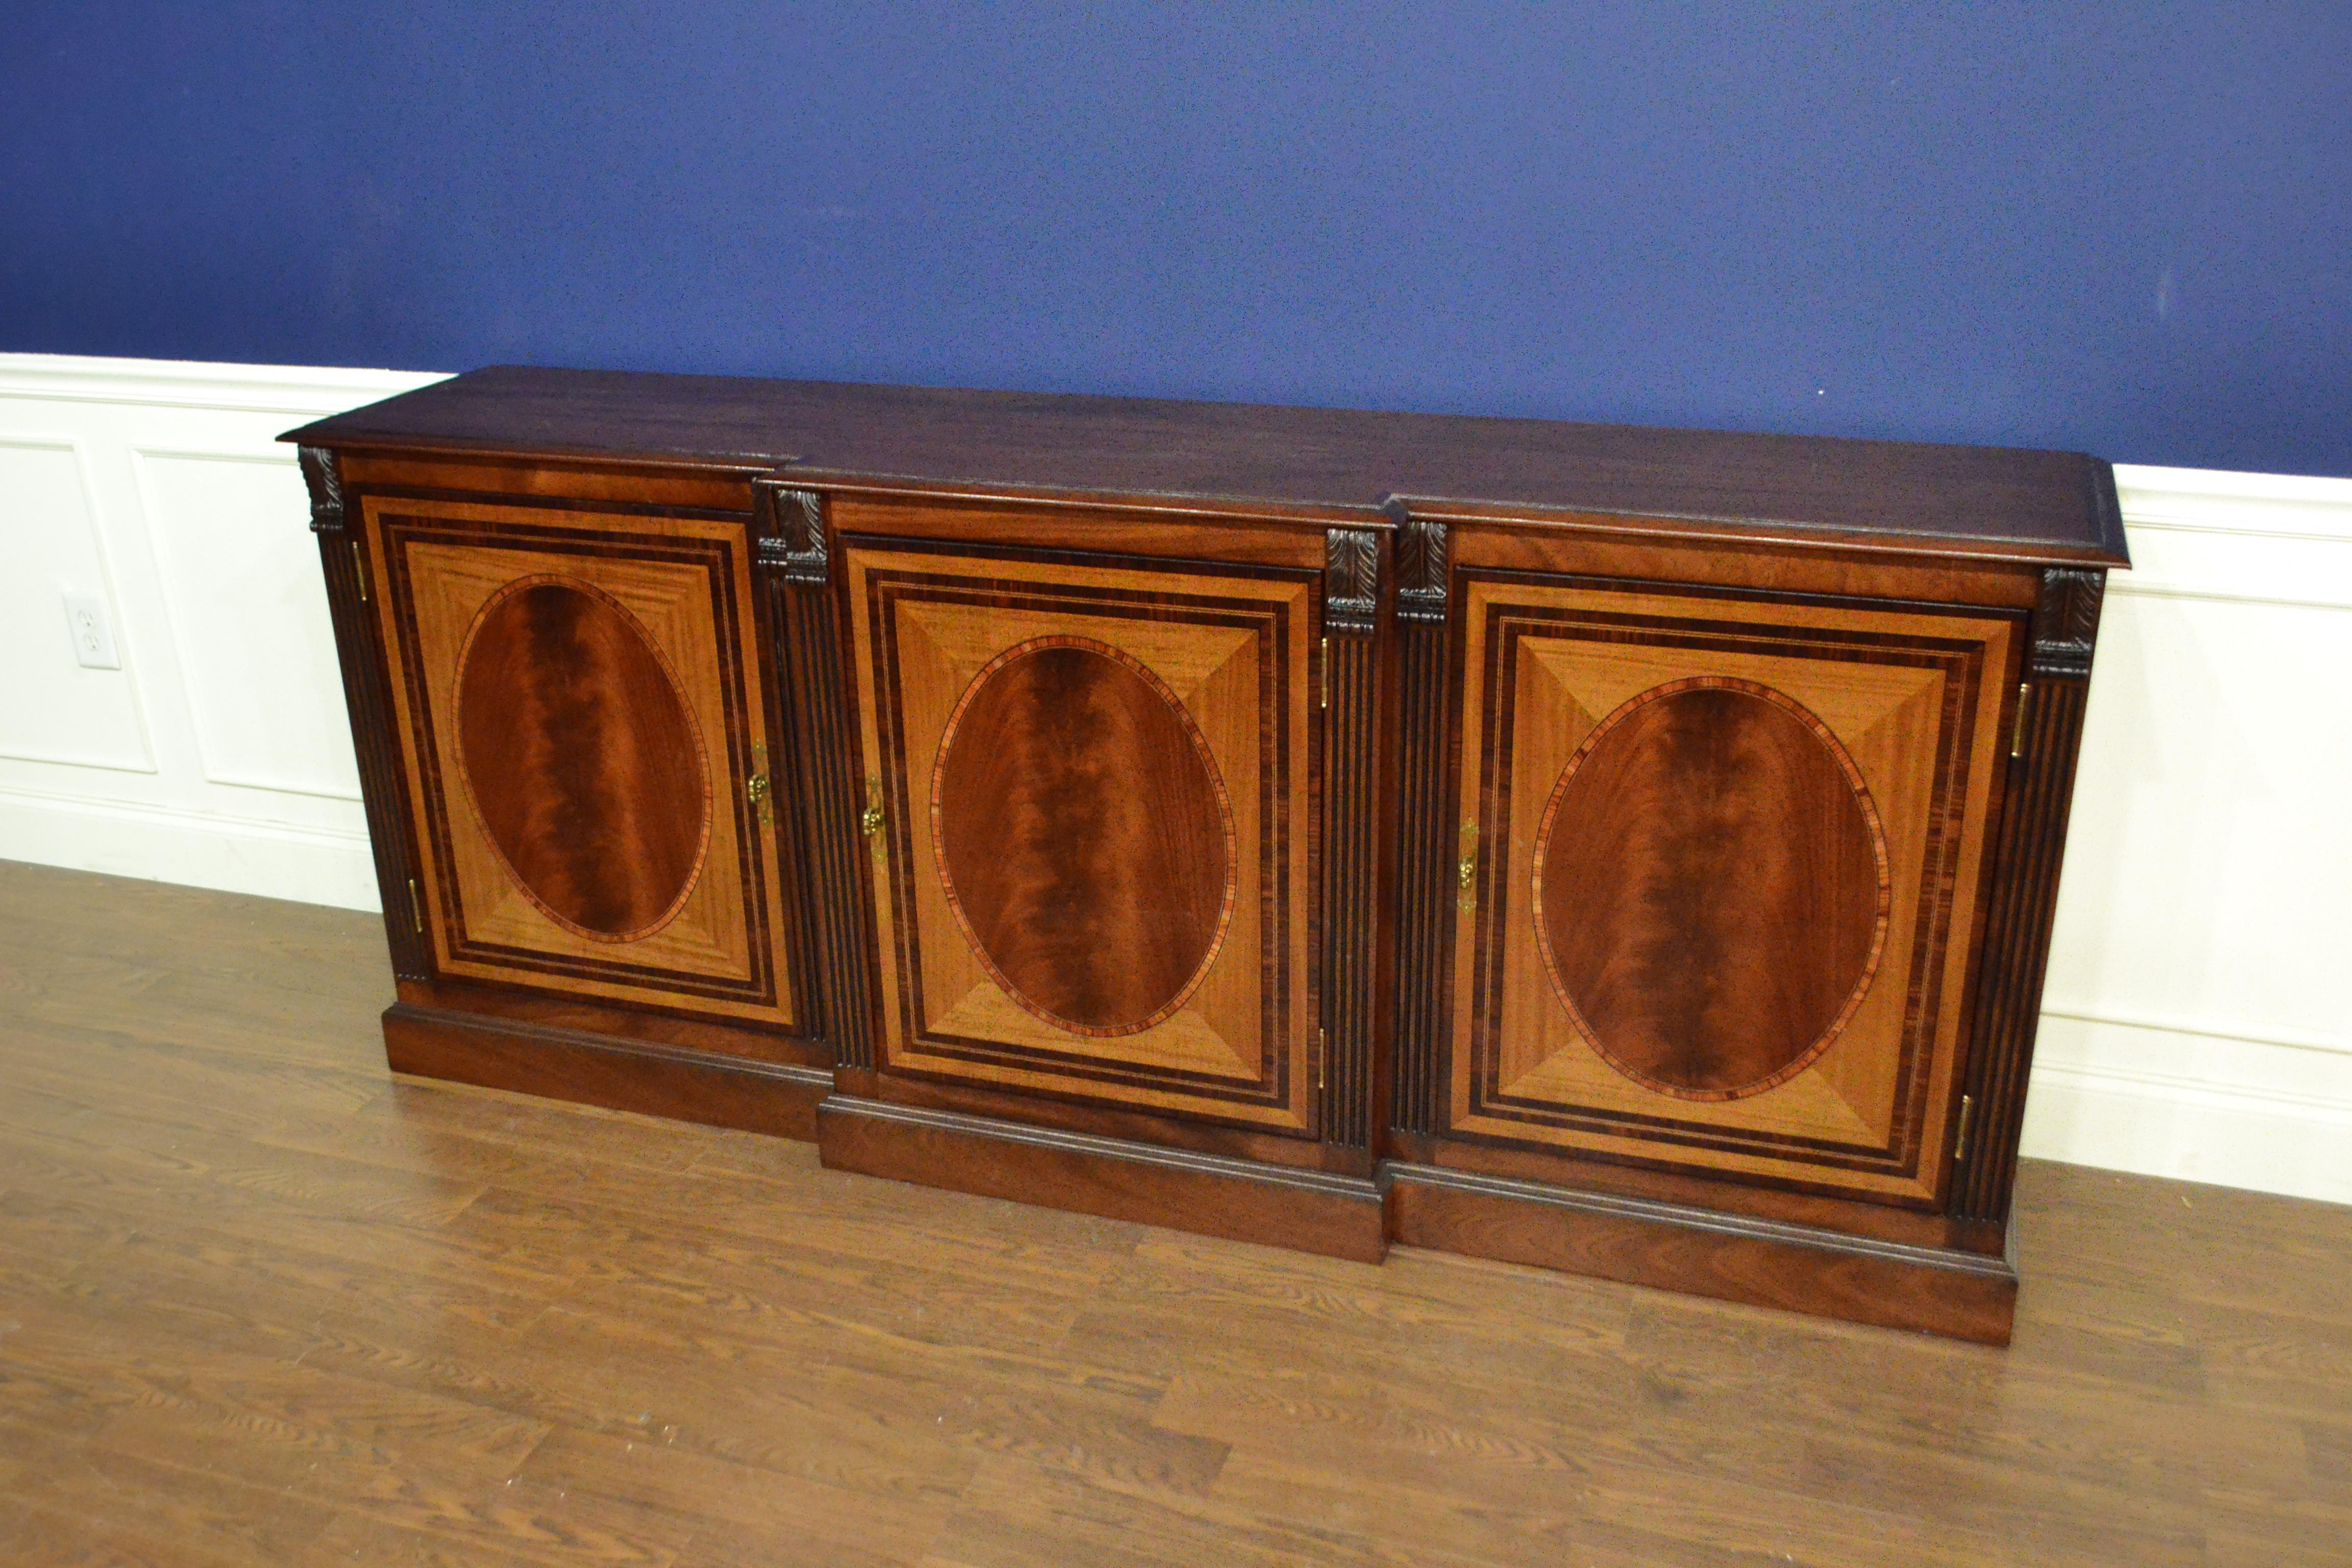 This is made-to-order traditional mahogany three door buffet or credenza made in the Leighton Hall shop. It features three doors with swirly crotch mahogany fields and satinwood and santos rosewood borders. It has a cathedral mahogany top with a